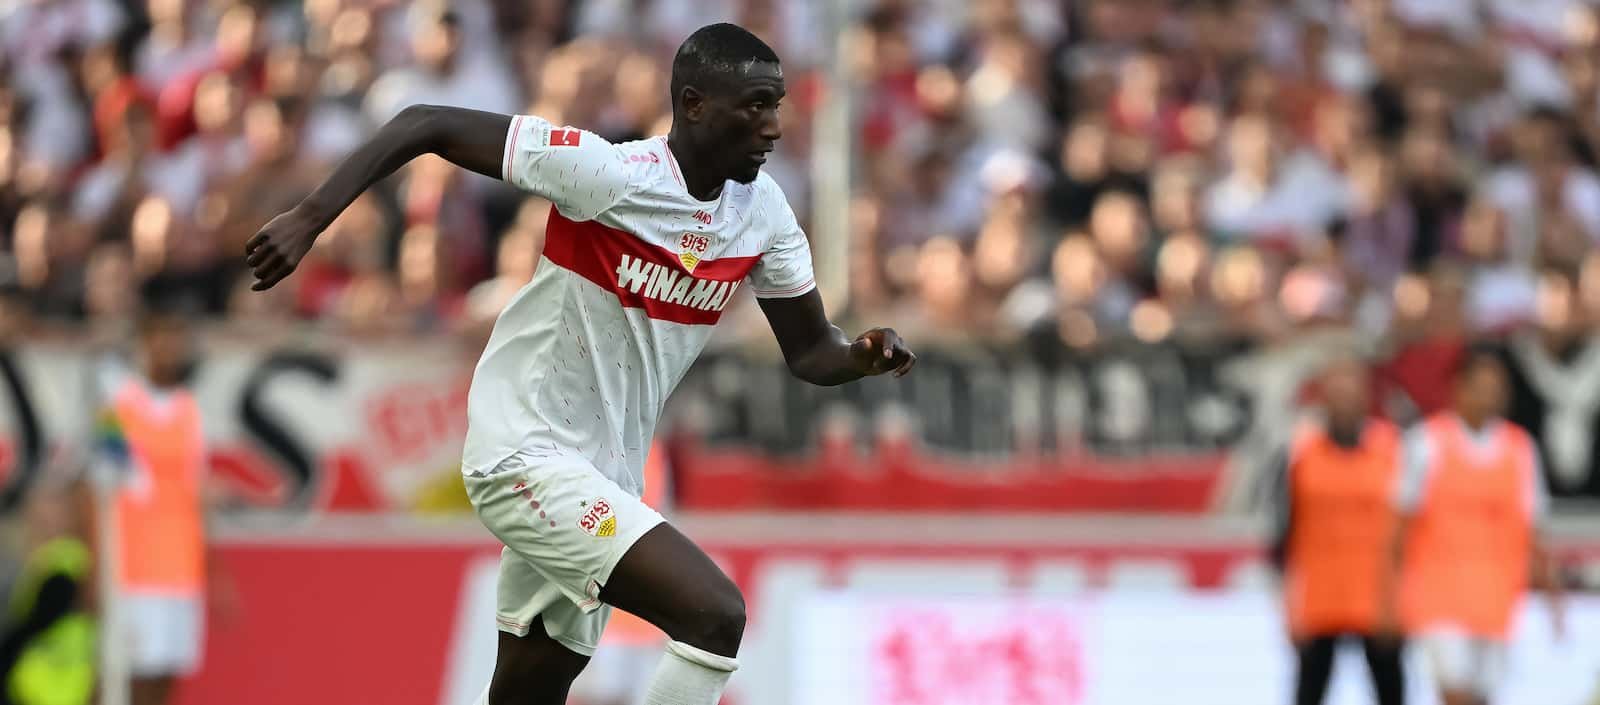 Manchester United’s chances of landing Serhou Guirassy given a boost by VfB Stuttgart Director of Football – Man United News And Transfer News